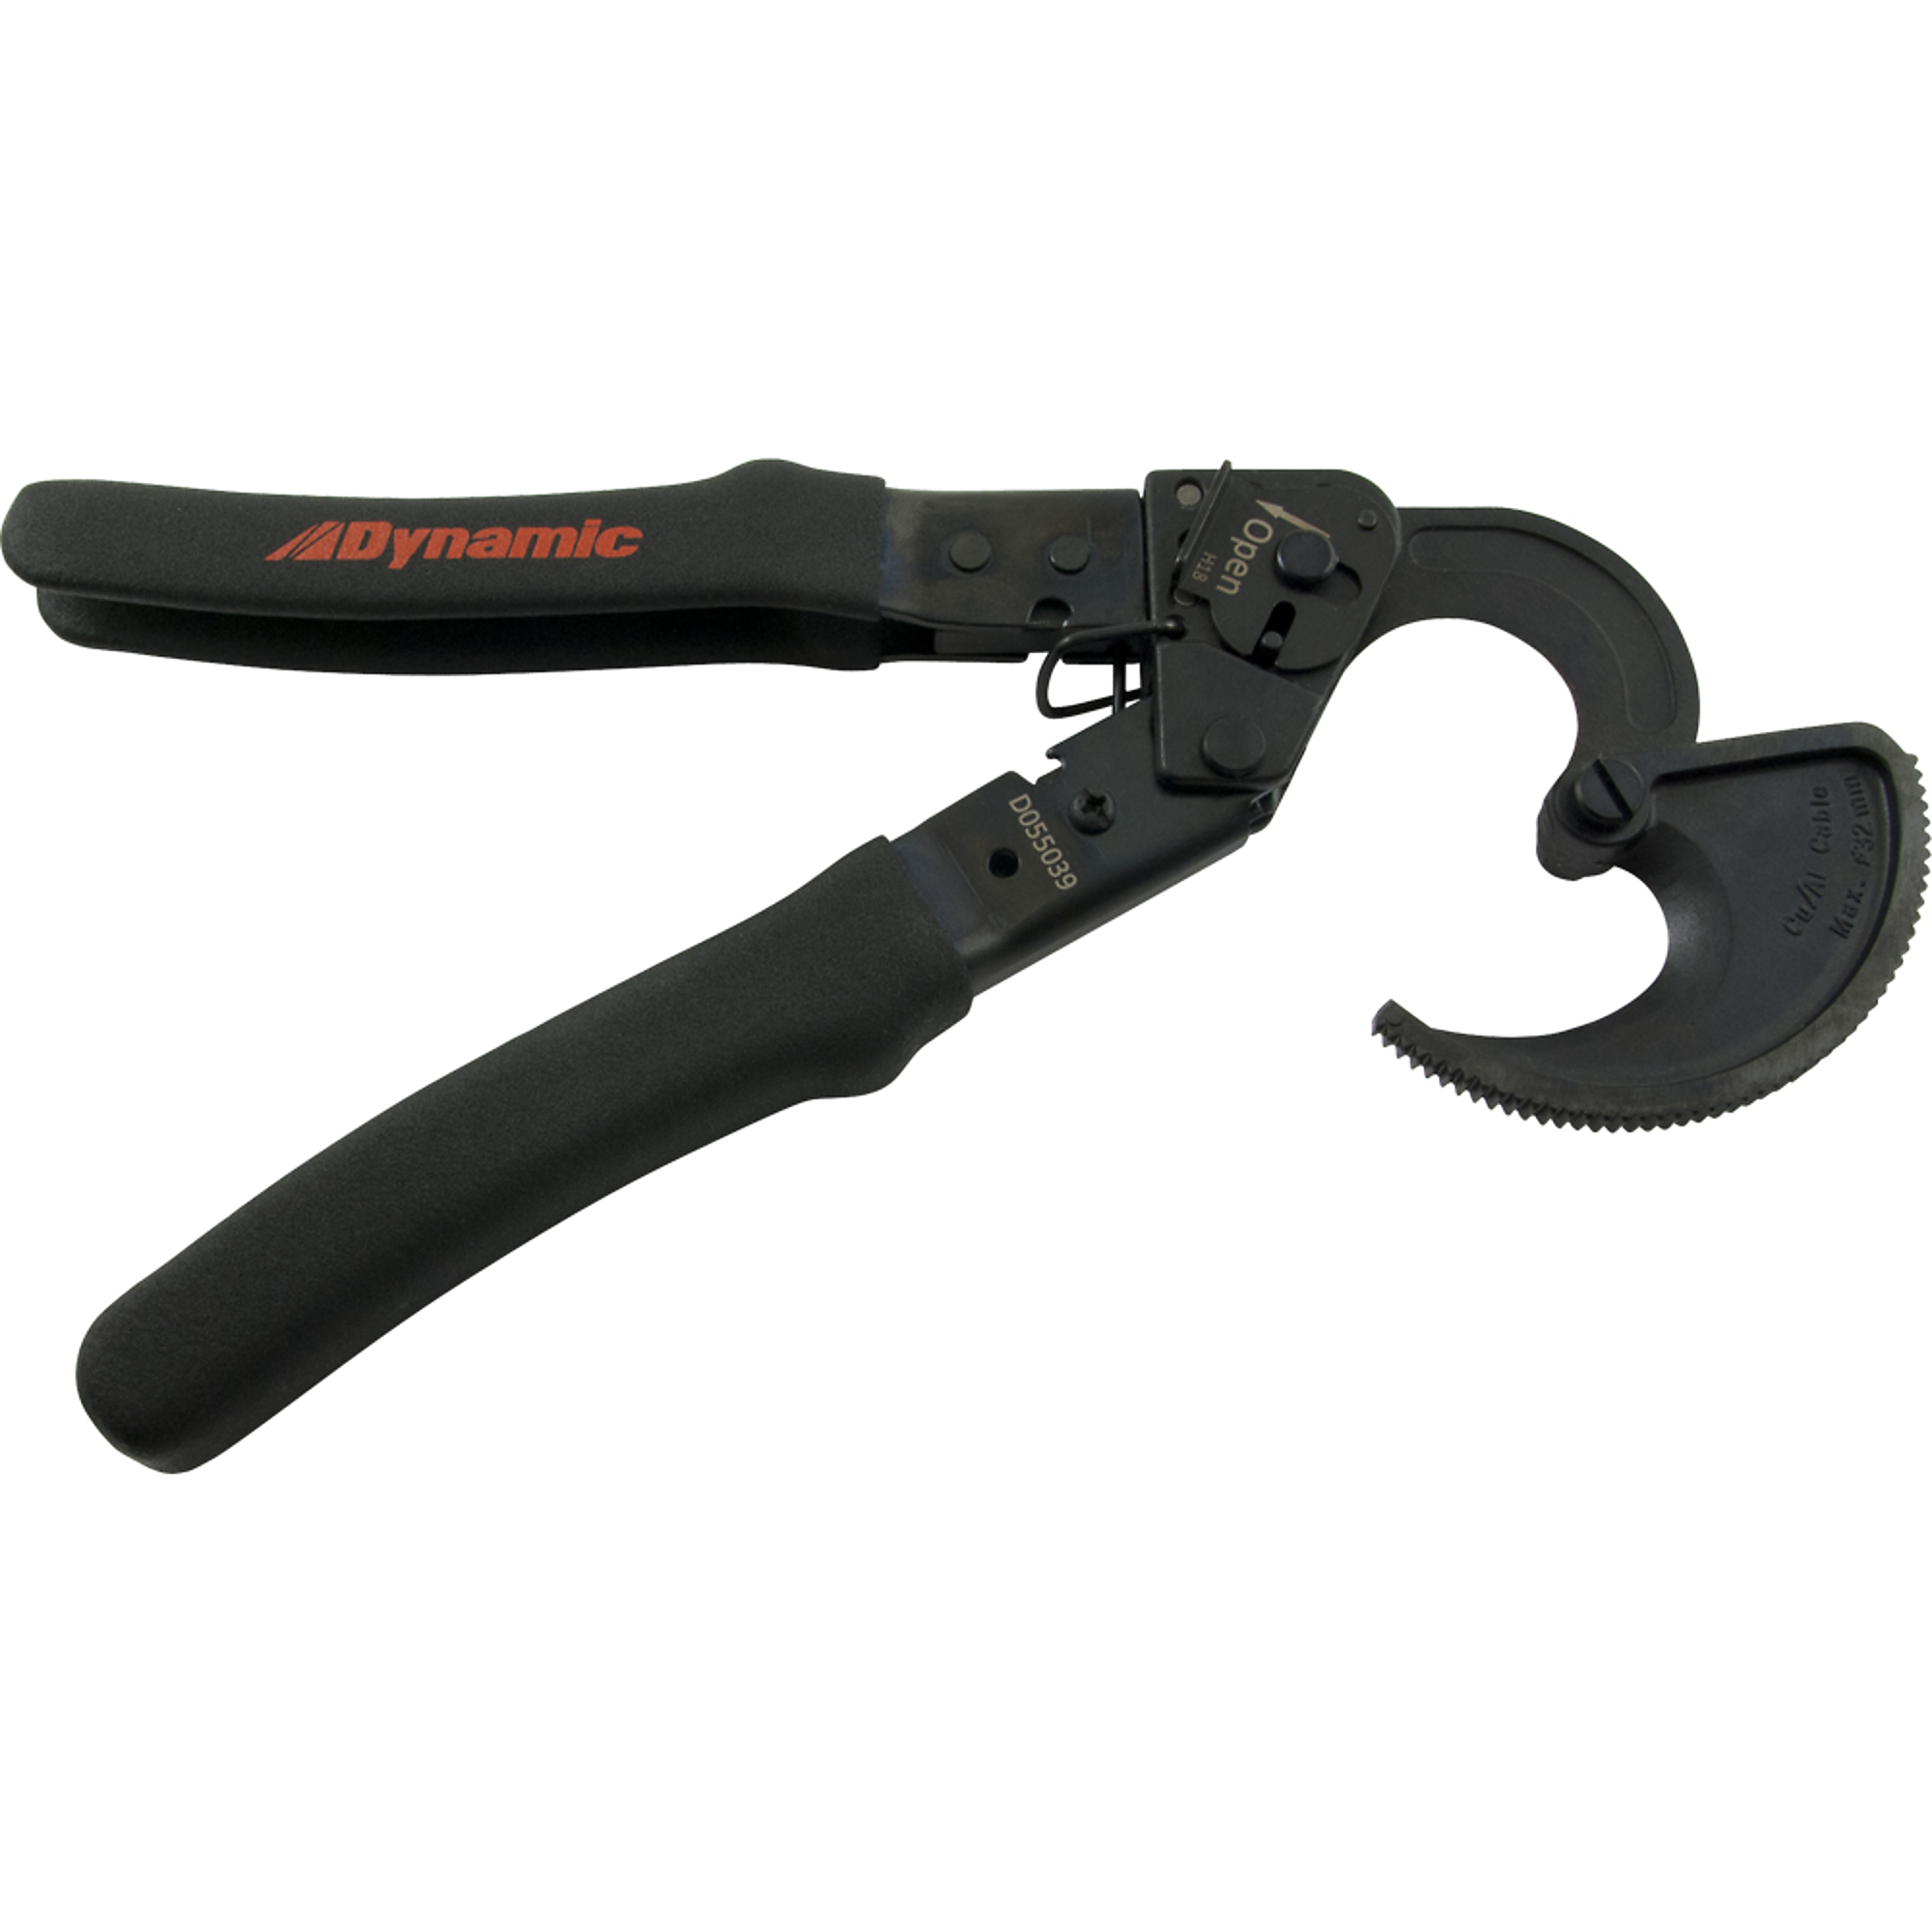 Cable Cutter Tool, 240mm2/500 MCM